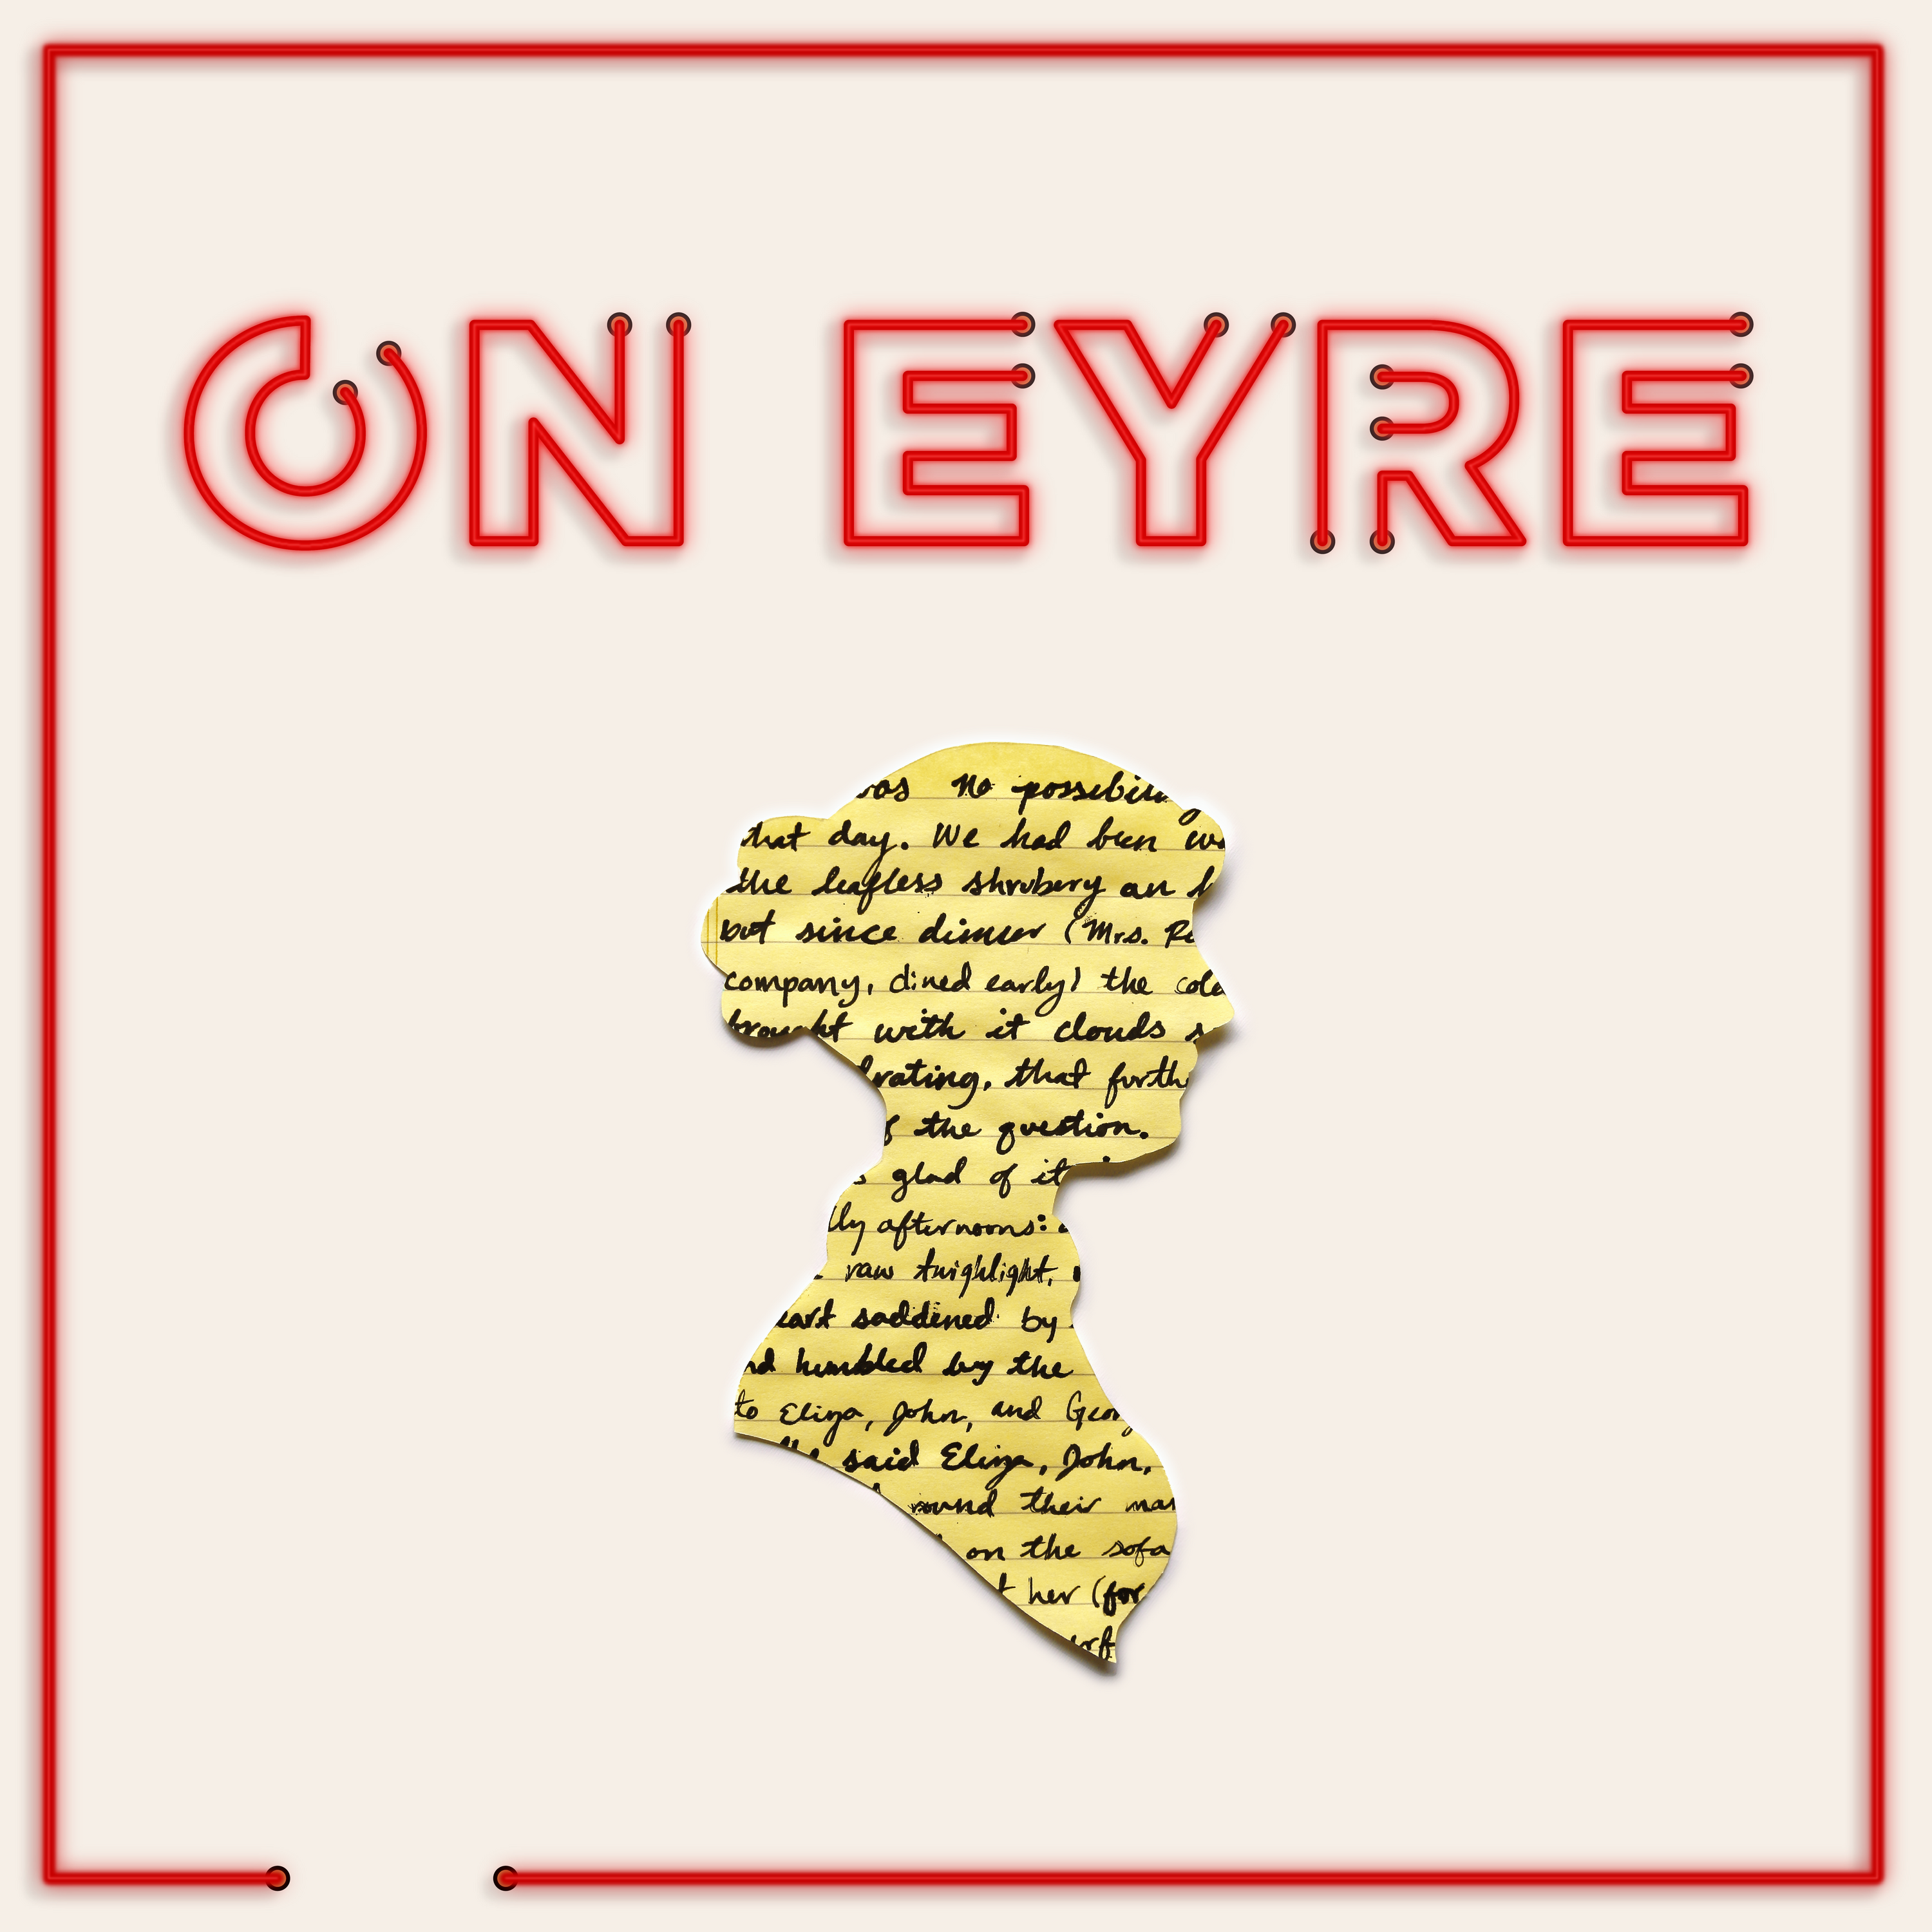 On Eyre: I Felt Pain, and Then I Felt Ire (Chapters 21 + 22)